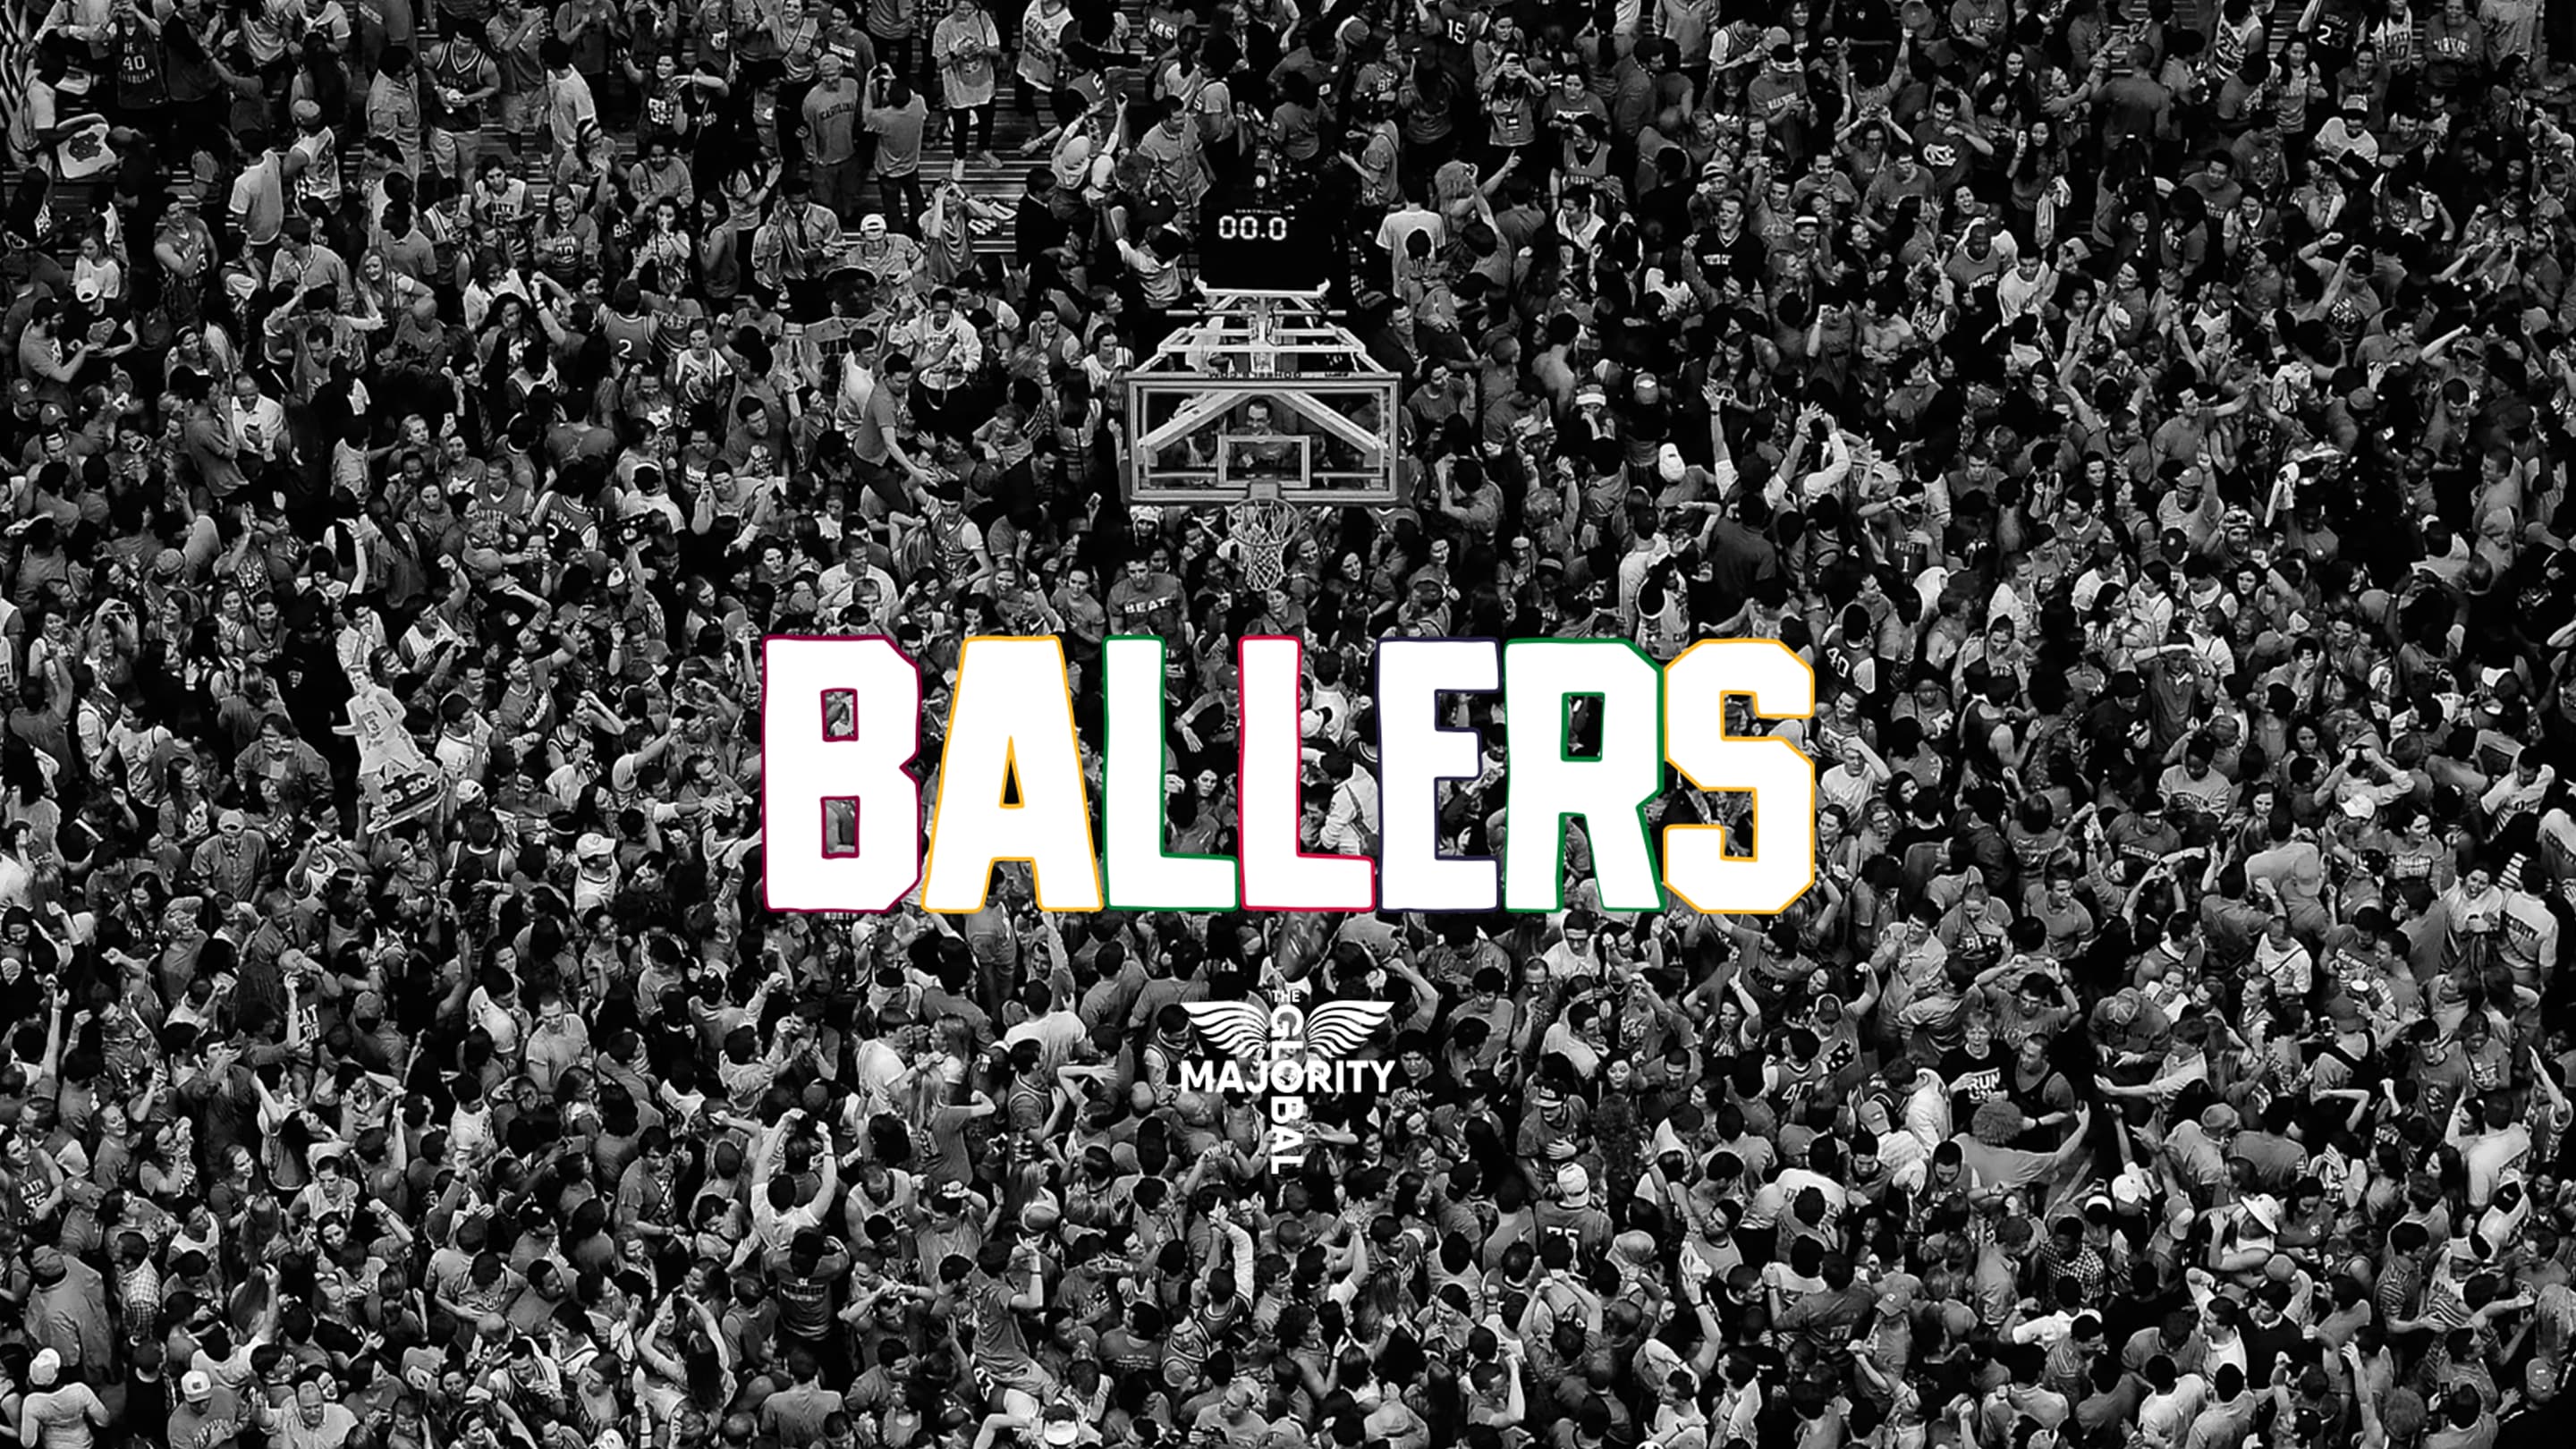 Pass The Baton x The Ballers Collection